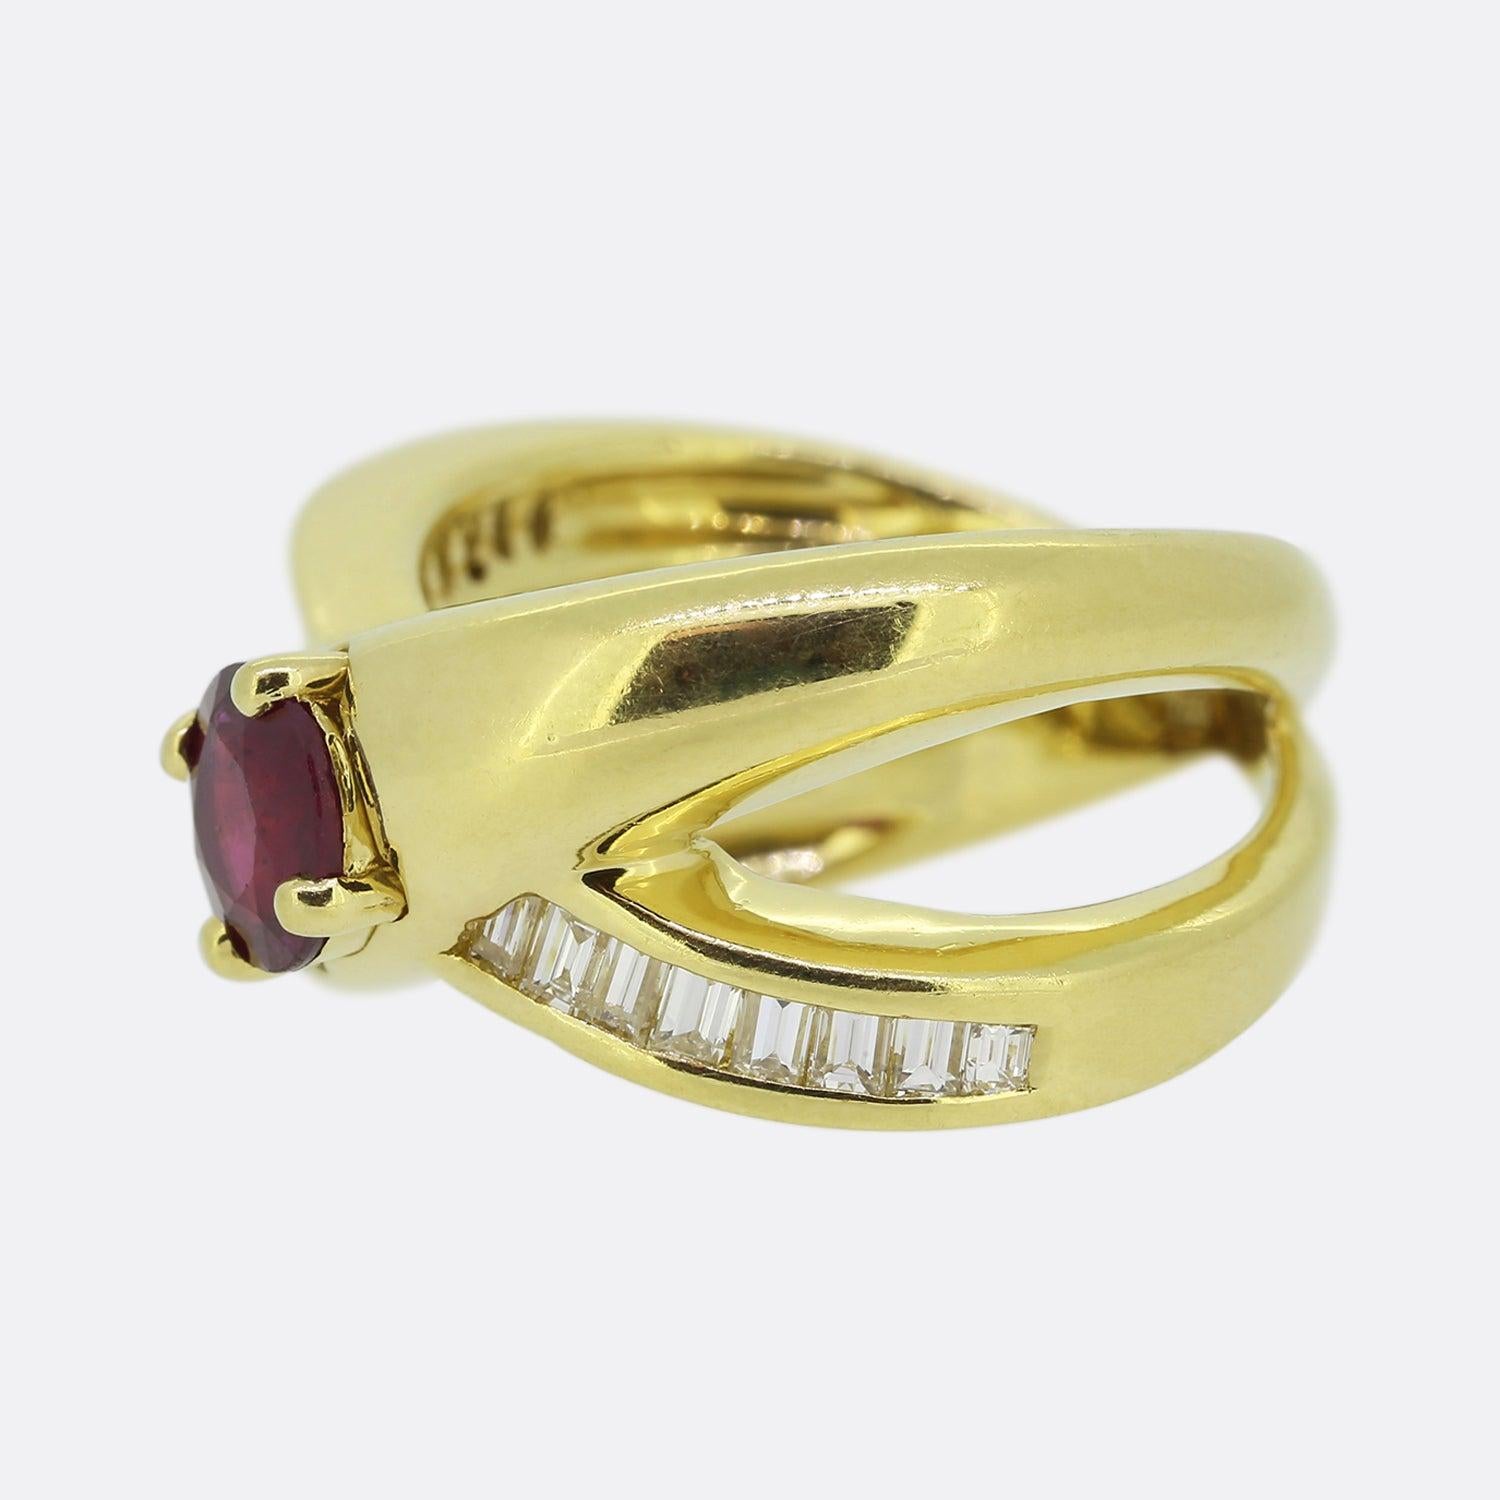 Here we have a lovely vintage crossover ring. The focal point of the ring is a 1.0 carat round ruby that sits in a four claw mount. One of the bands features channel set baguette cut diamonds that graduate in size to the middle.

Condition: Used